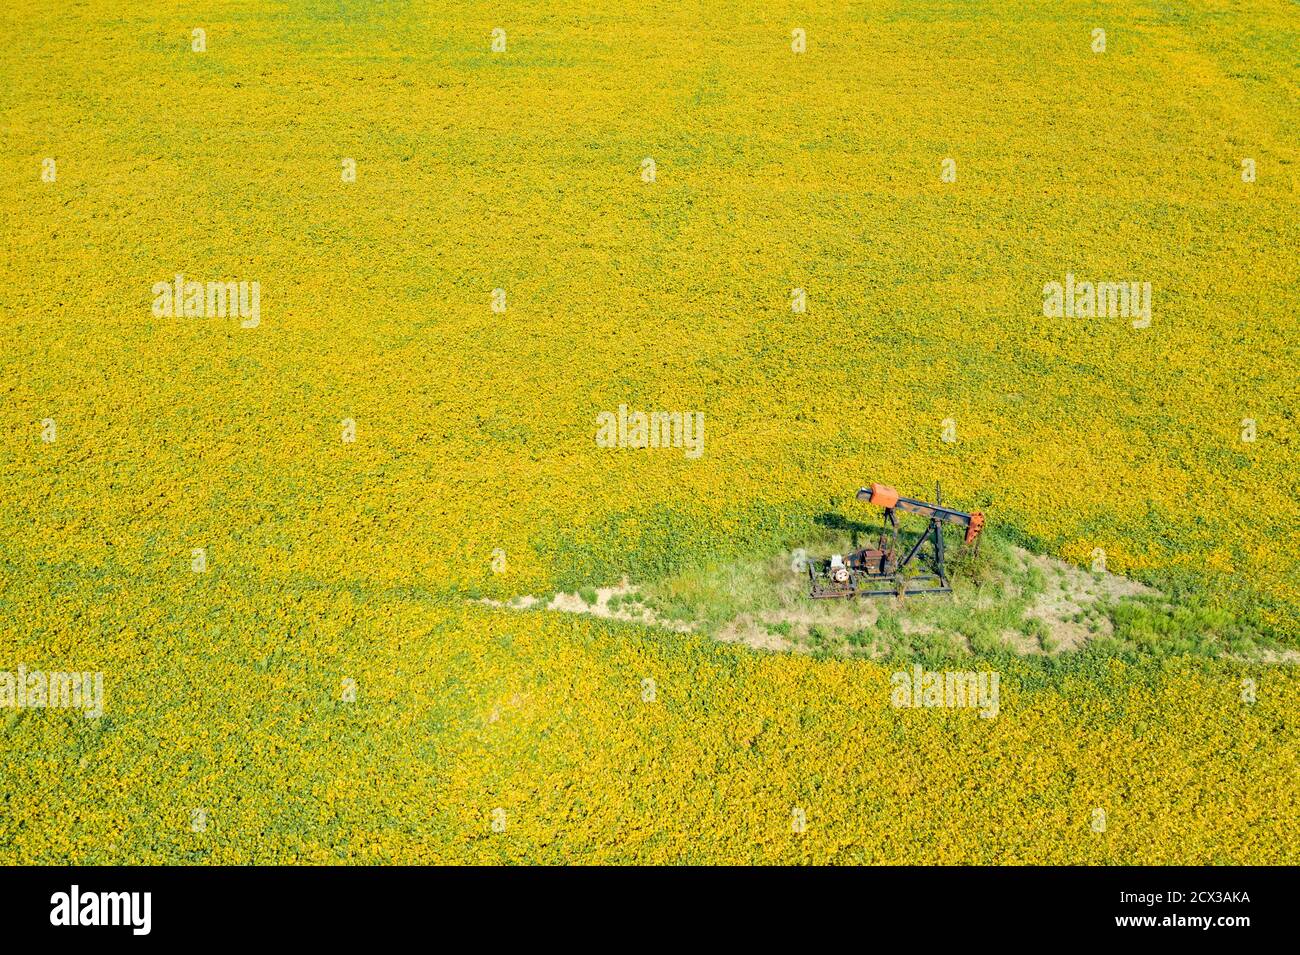 North Benton, Ohio - An old oil well in a yellow soybean field in early autumn. Stock Photo